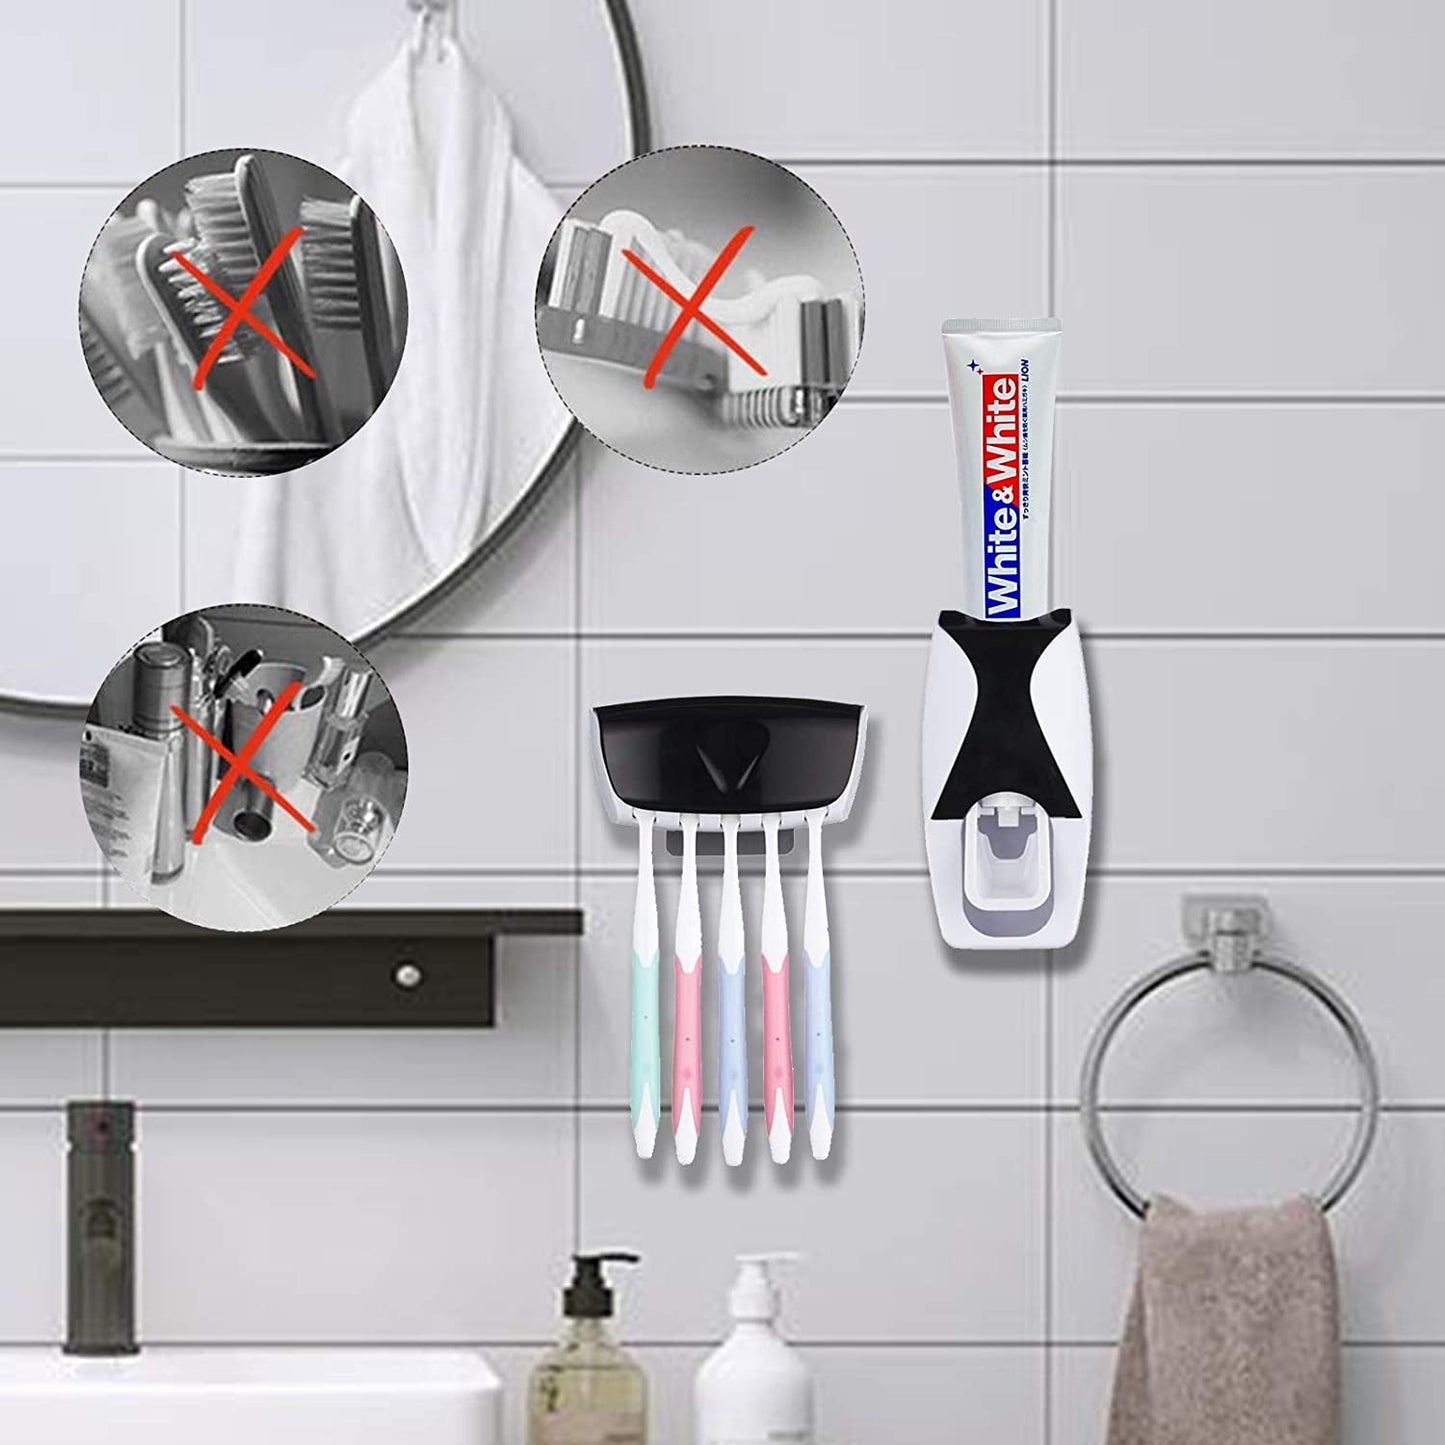 Automatic Toothpaste Dispenser & Toothbrush Holder Set